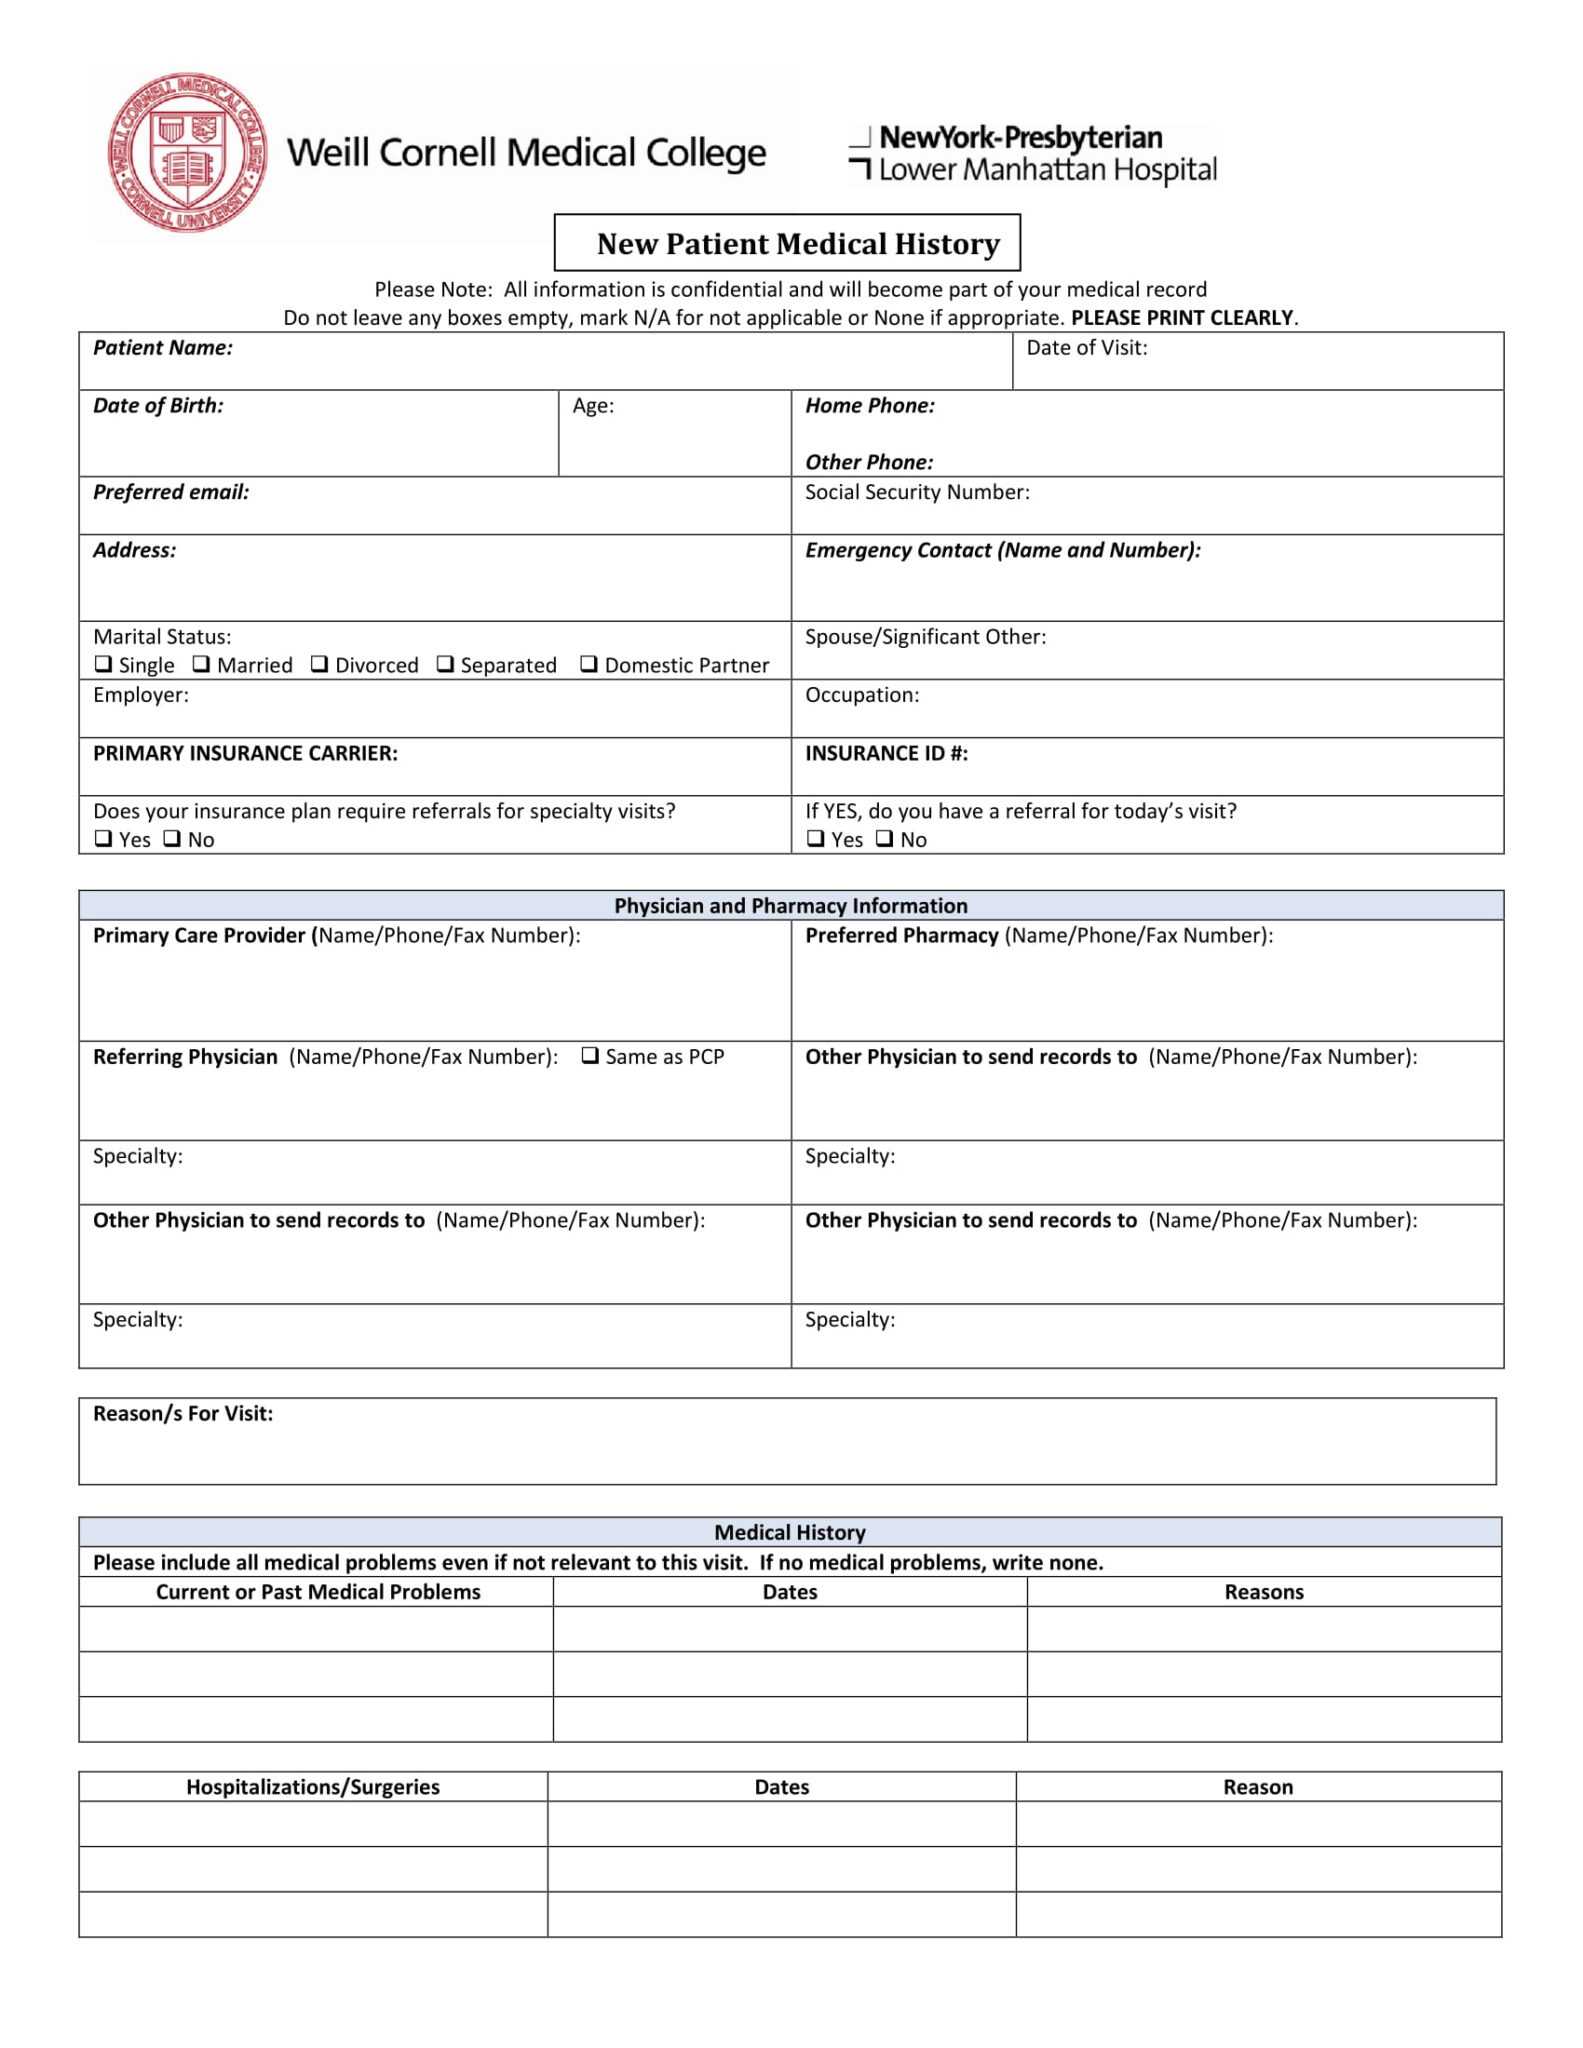 printable-patient-medical-history-form-template-printable-templates-riset